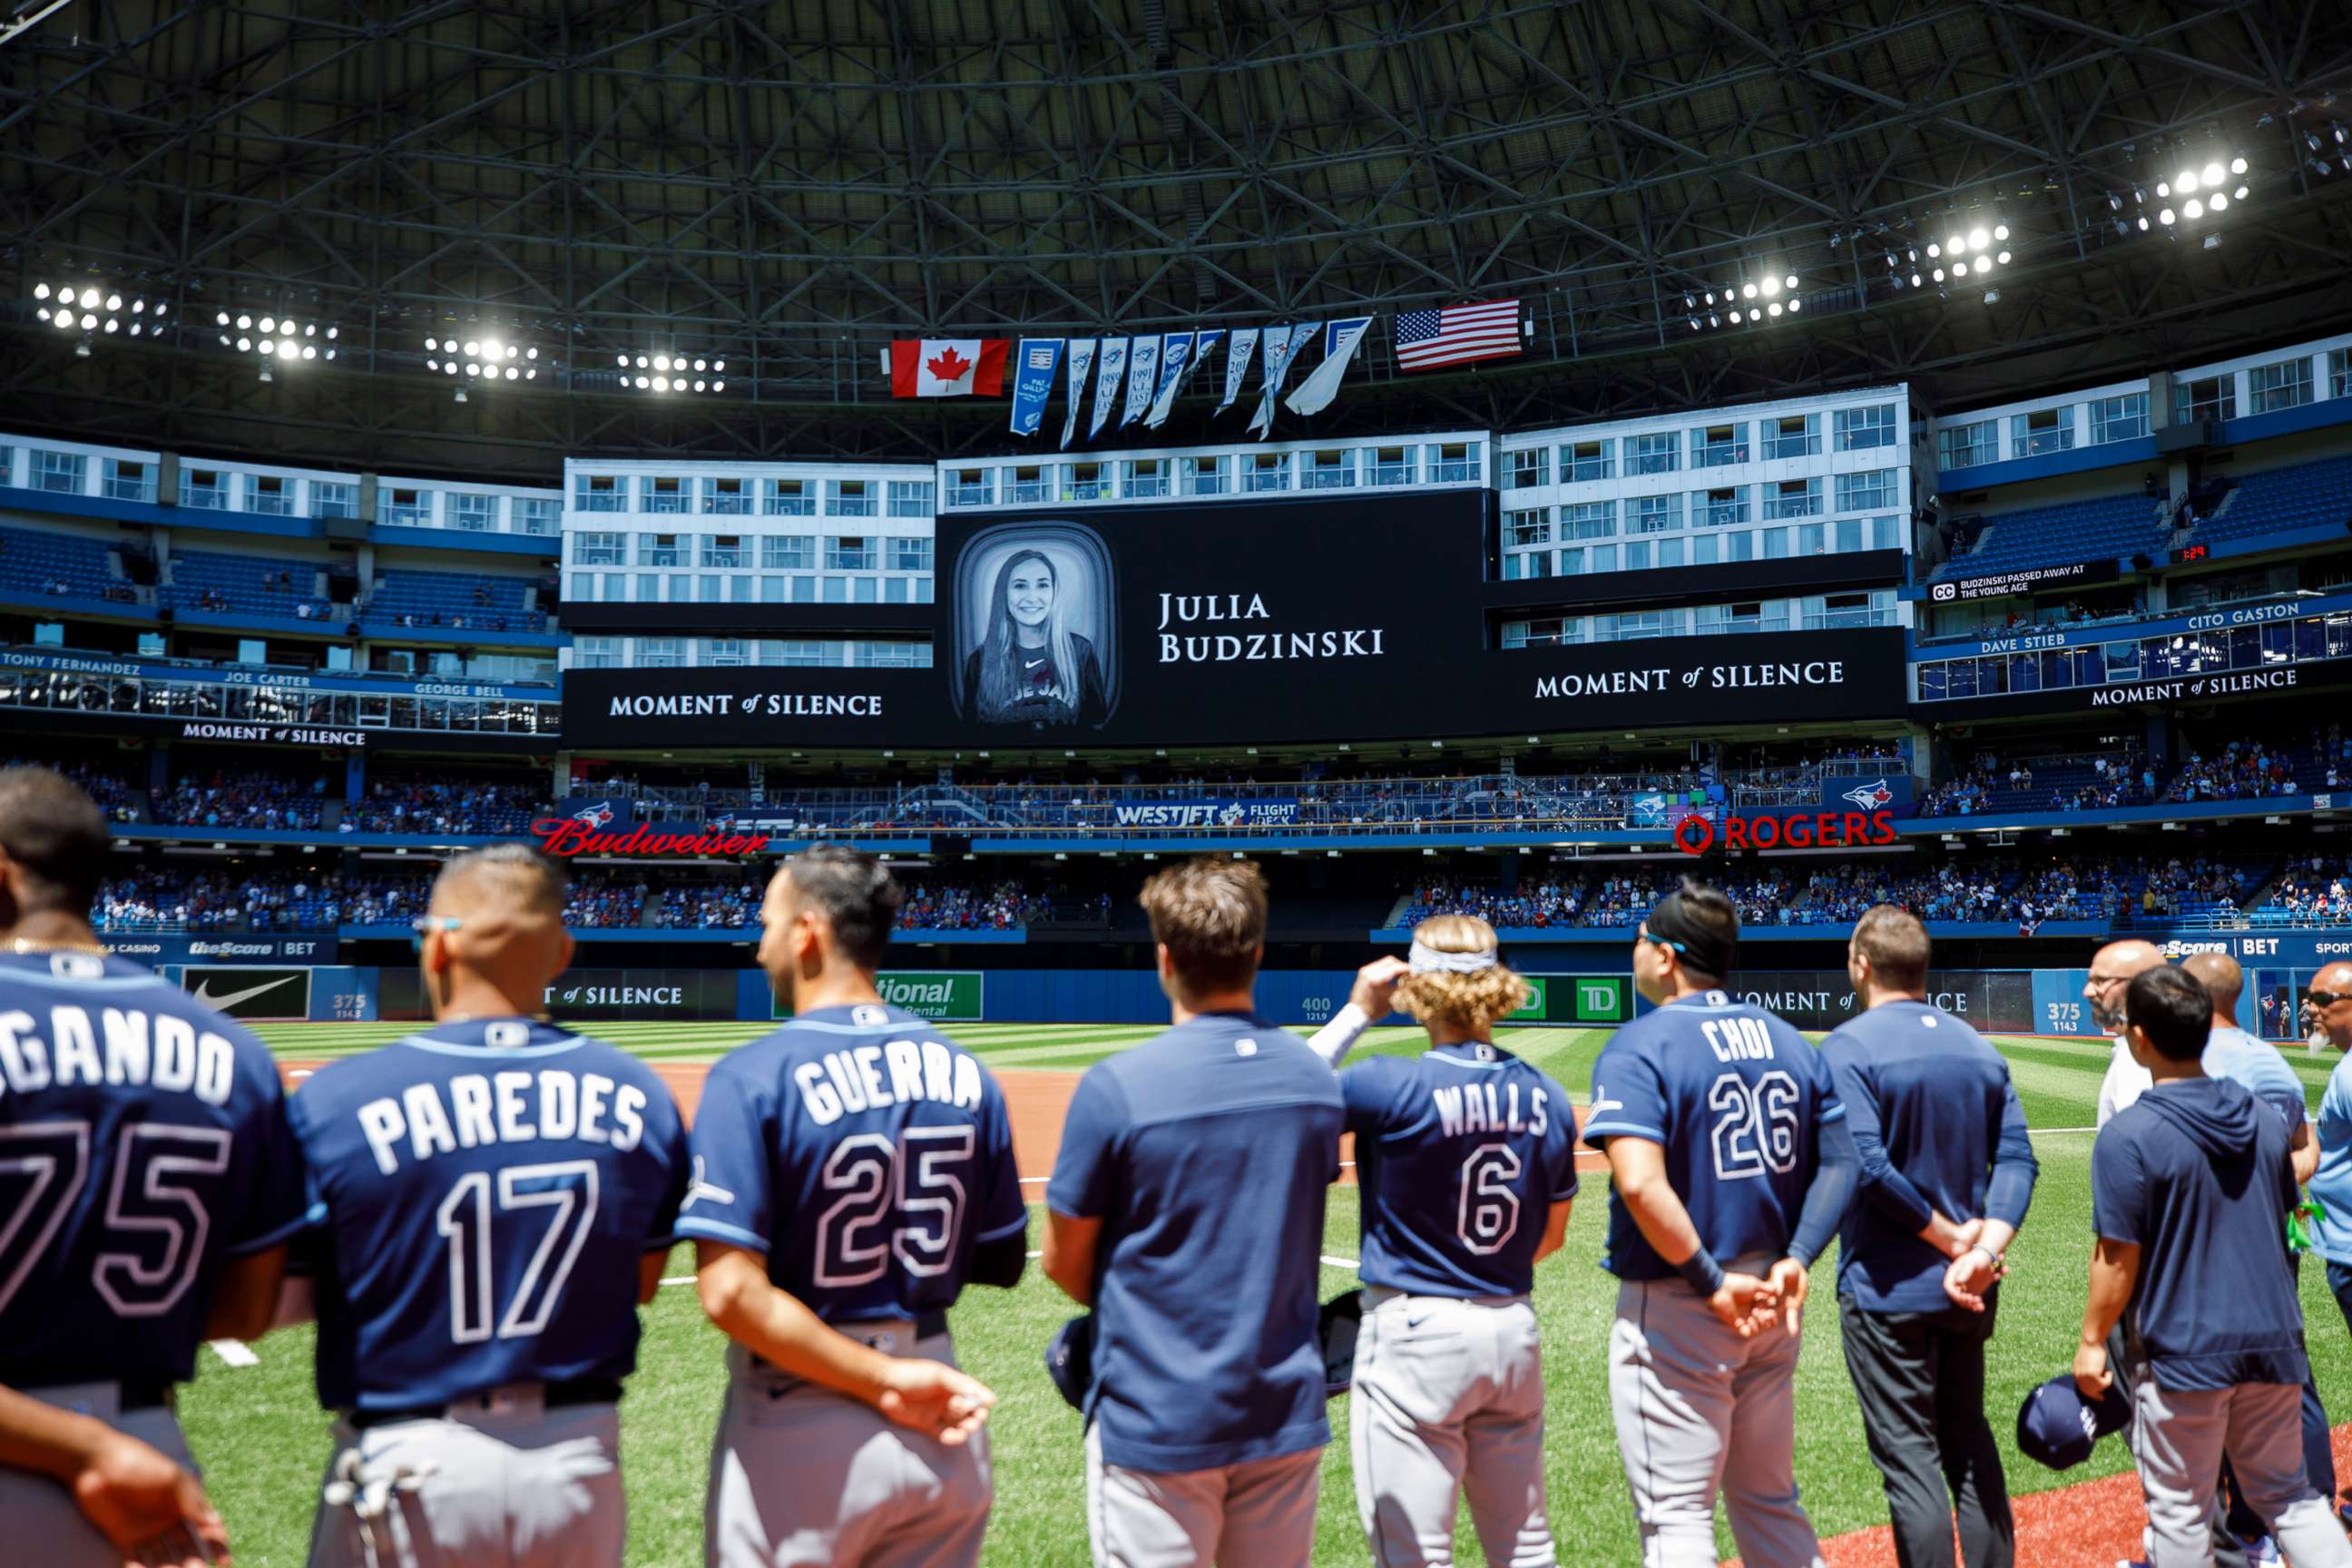 7 wish list items for a brand new Blue Jays stadium in Toronto